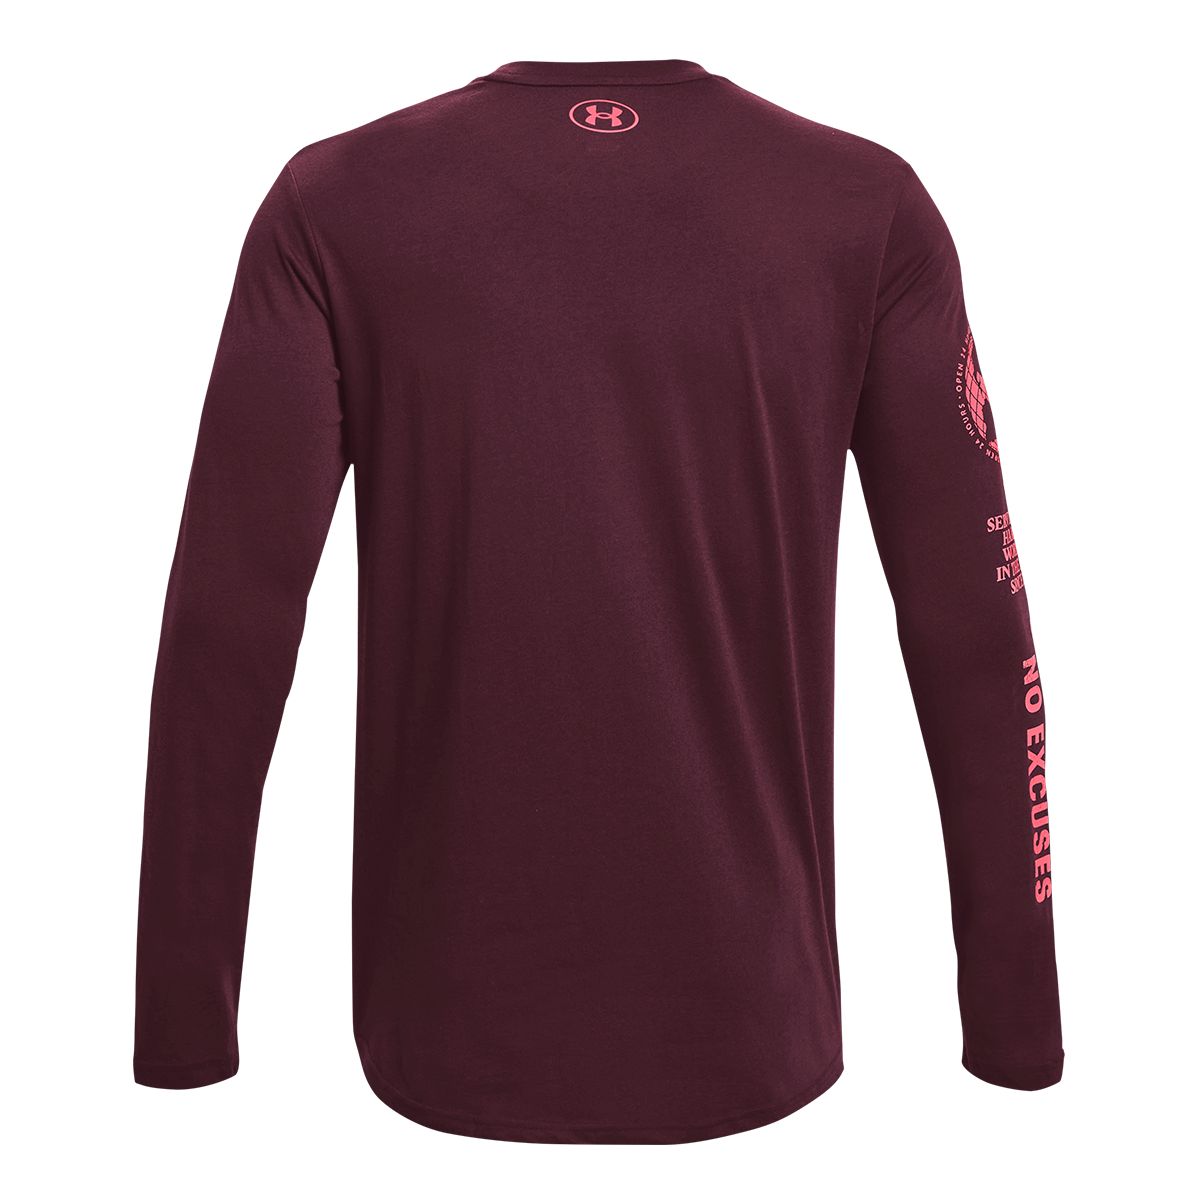 Miami University Red Under Armour Long Sleeve Tee